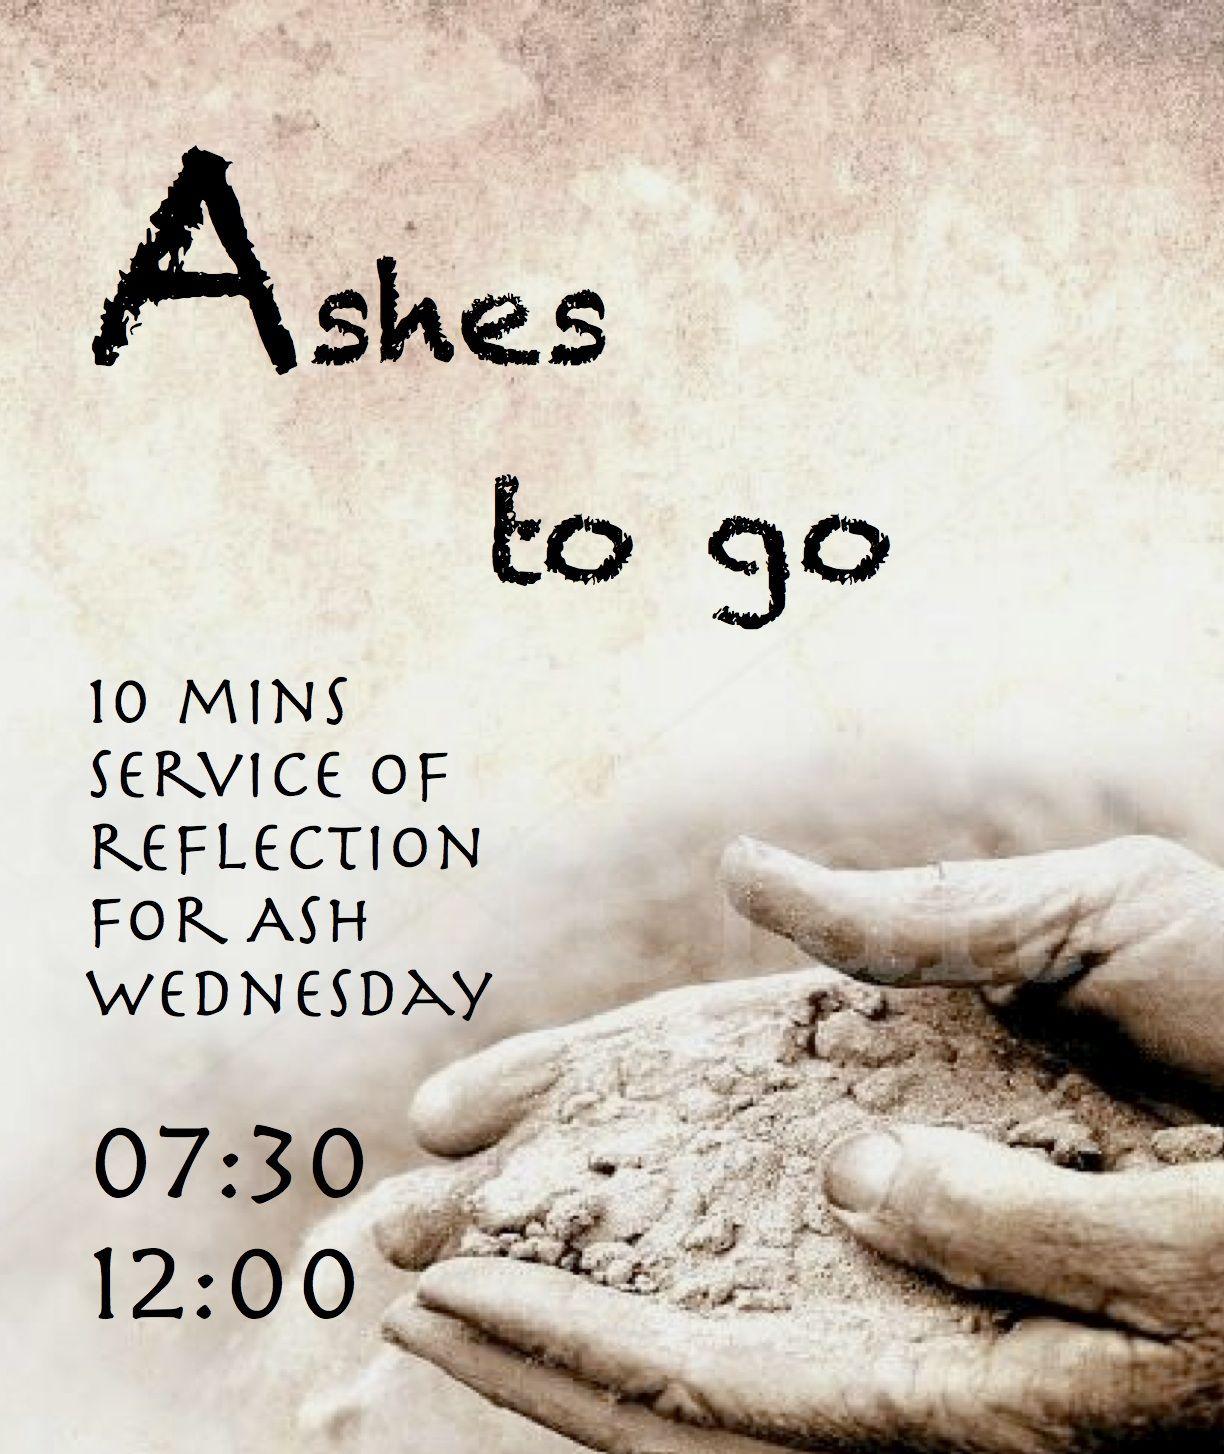 Ash wednesday images with quotes